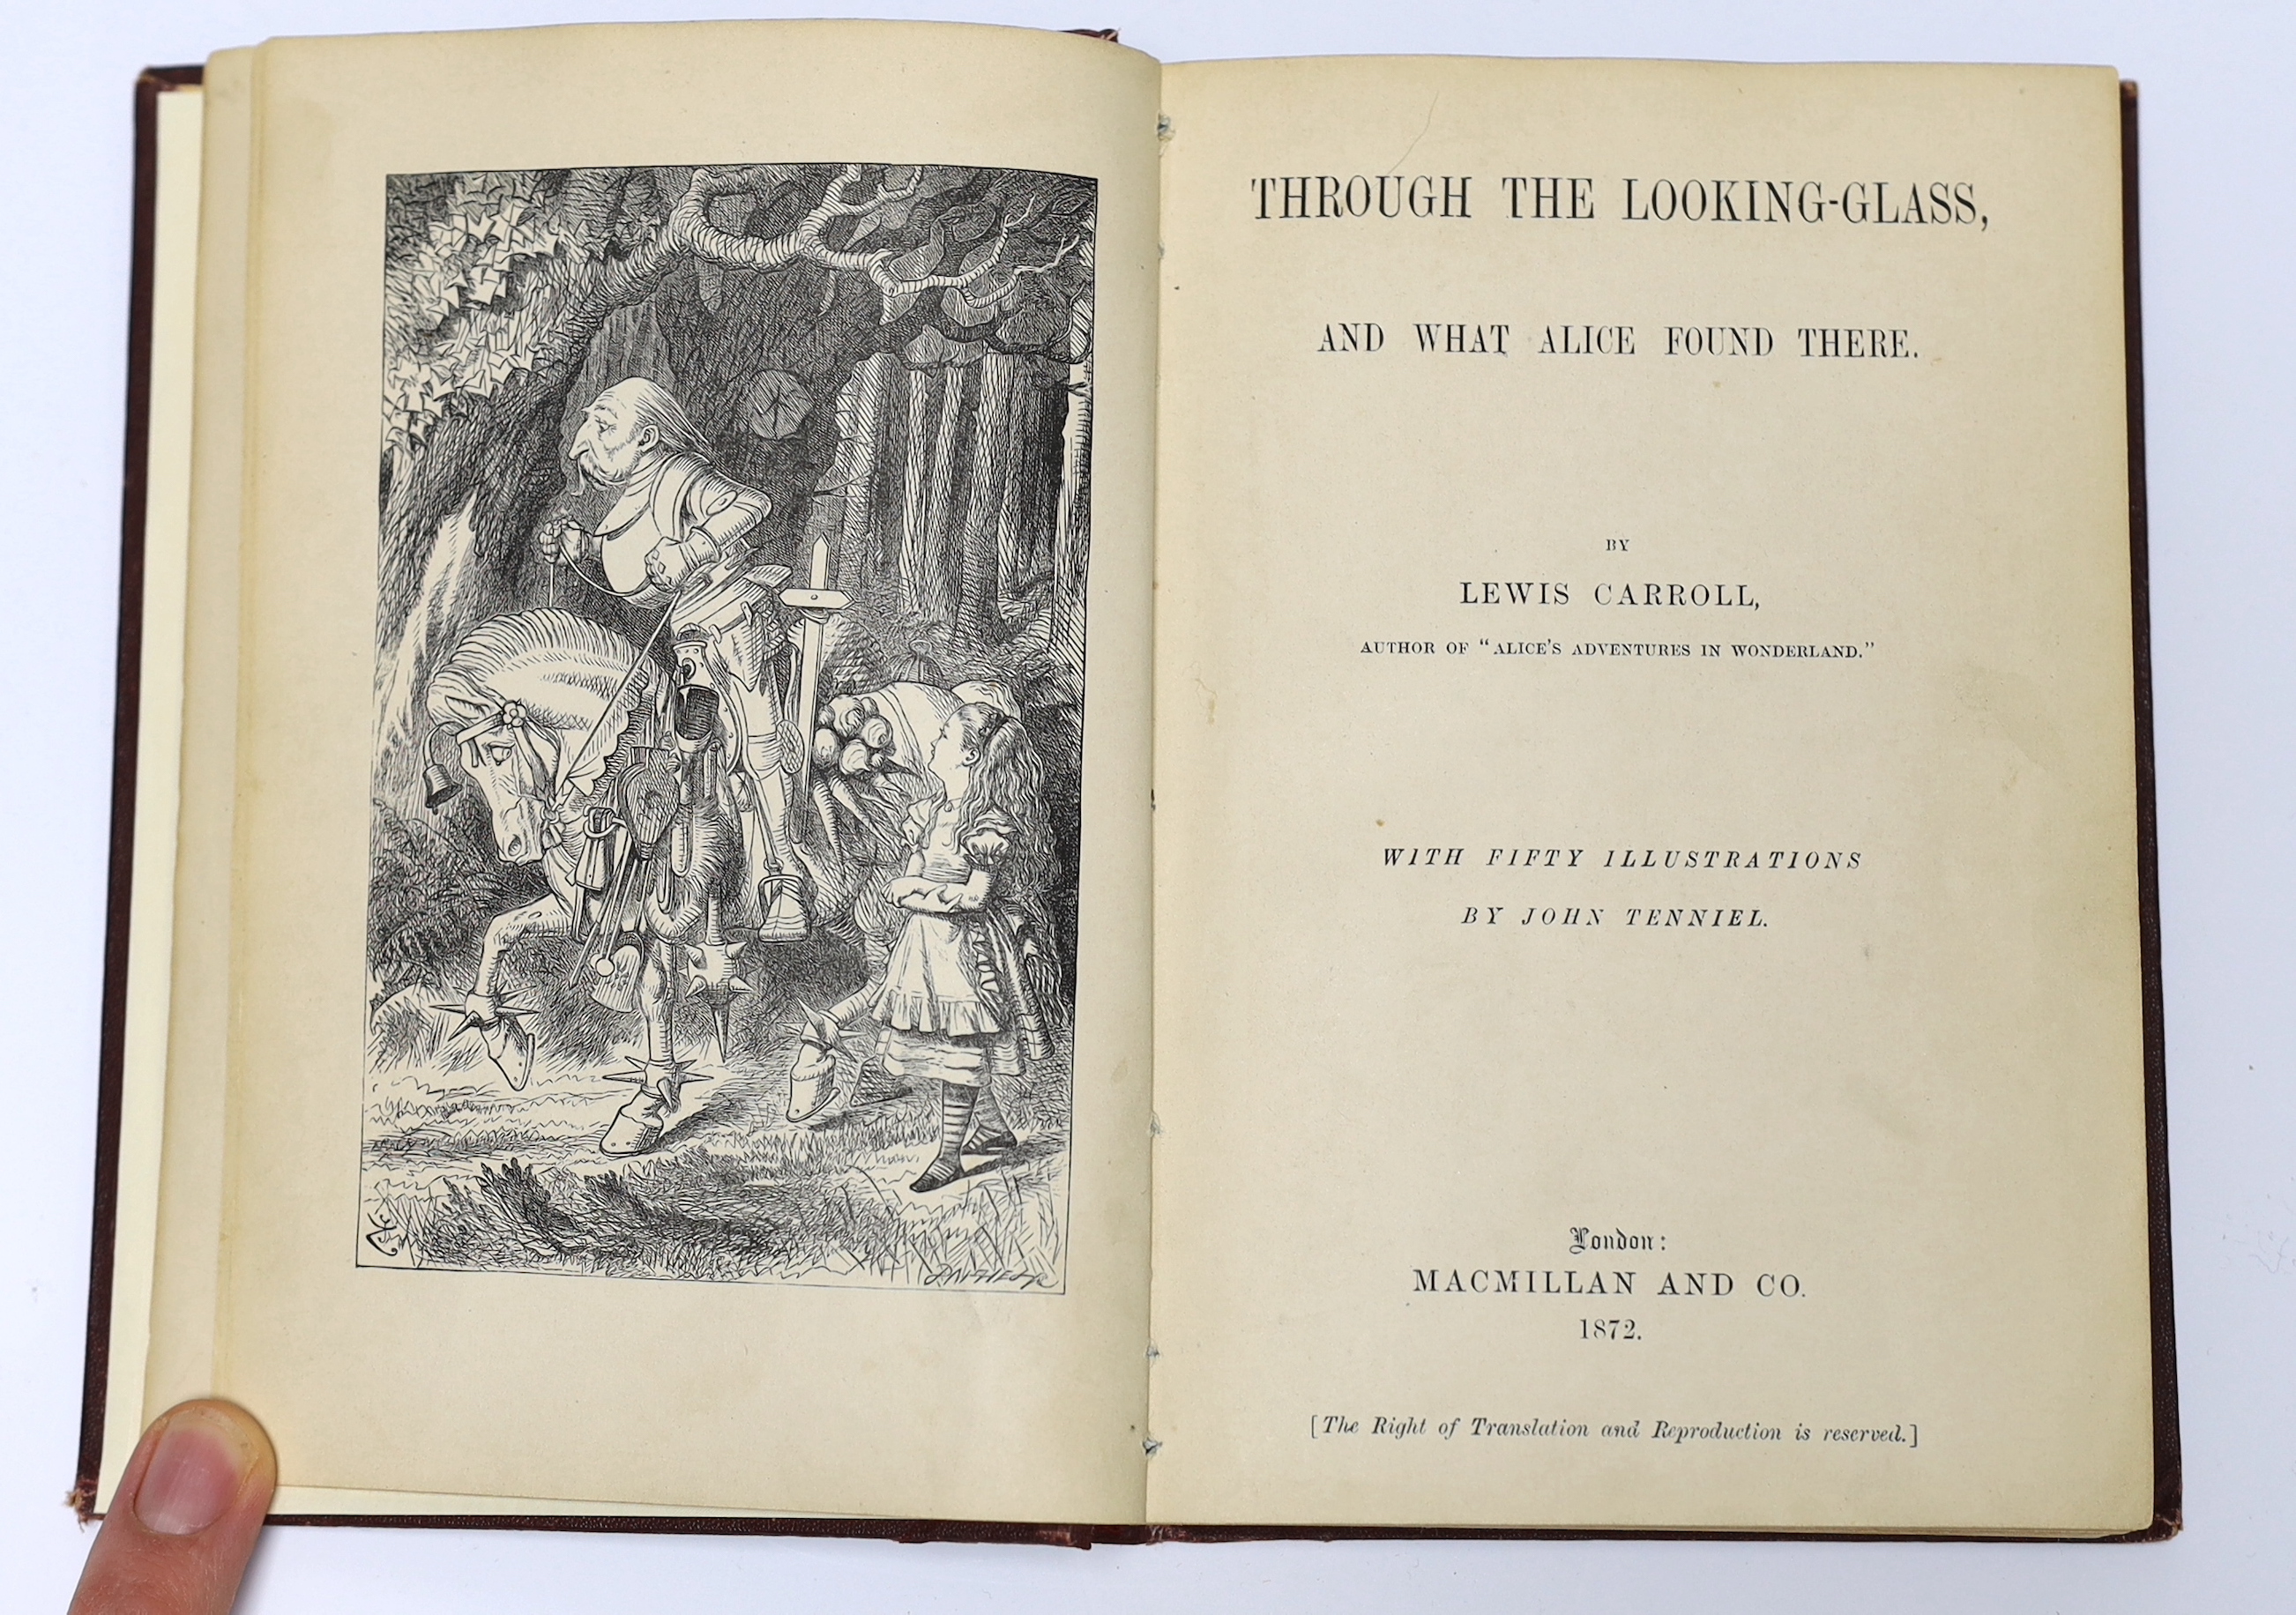 Dodgson, Charles Lutwidge [Carroll, Lewis] - Through the Looking Glass and What Alice Found There, 1st edition, 1st issue, 8vo, rebound red cloth, wood engraved frontispiece and 49 others by John Tenniel, 1p. of advertis